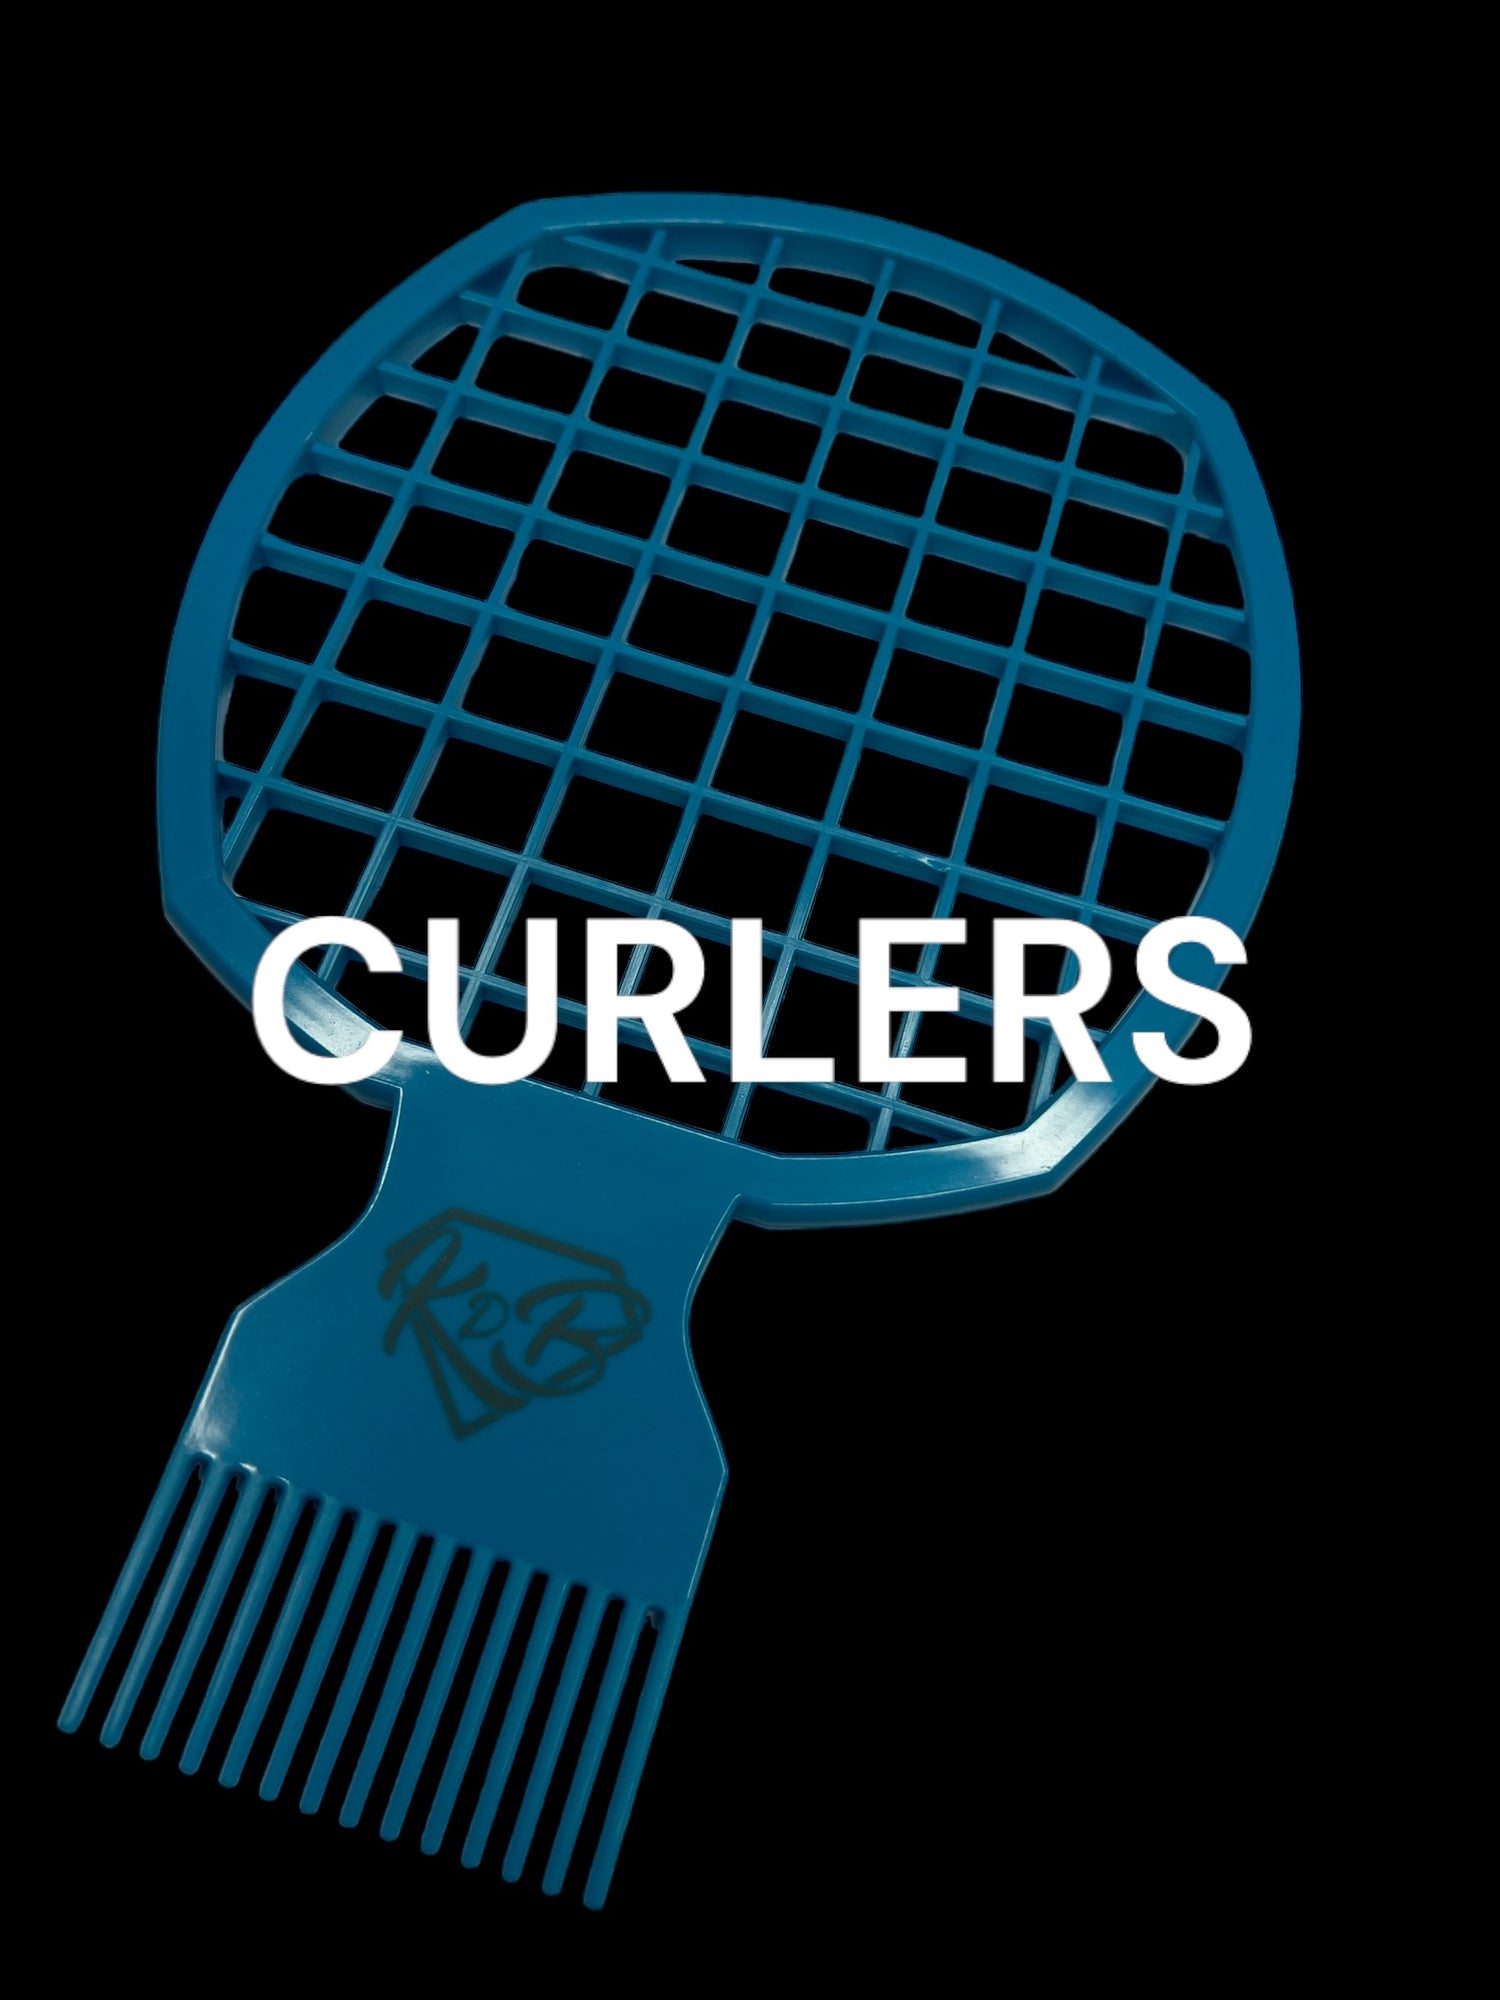 CURLERS